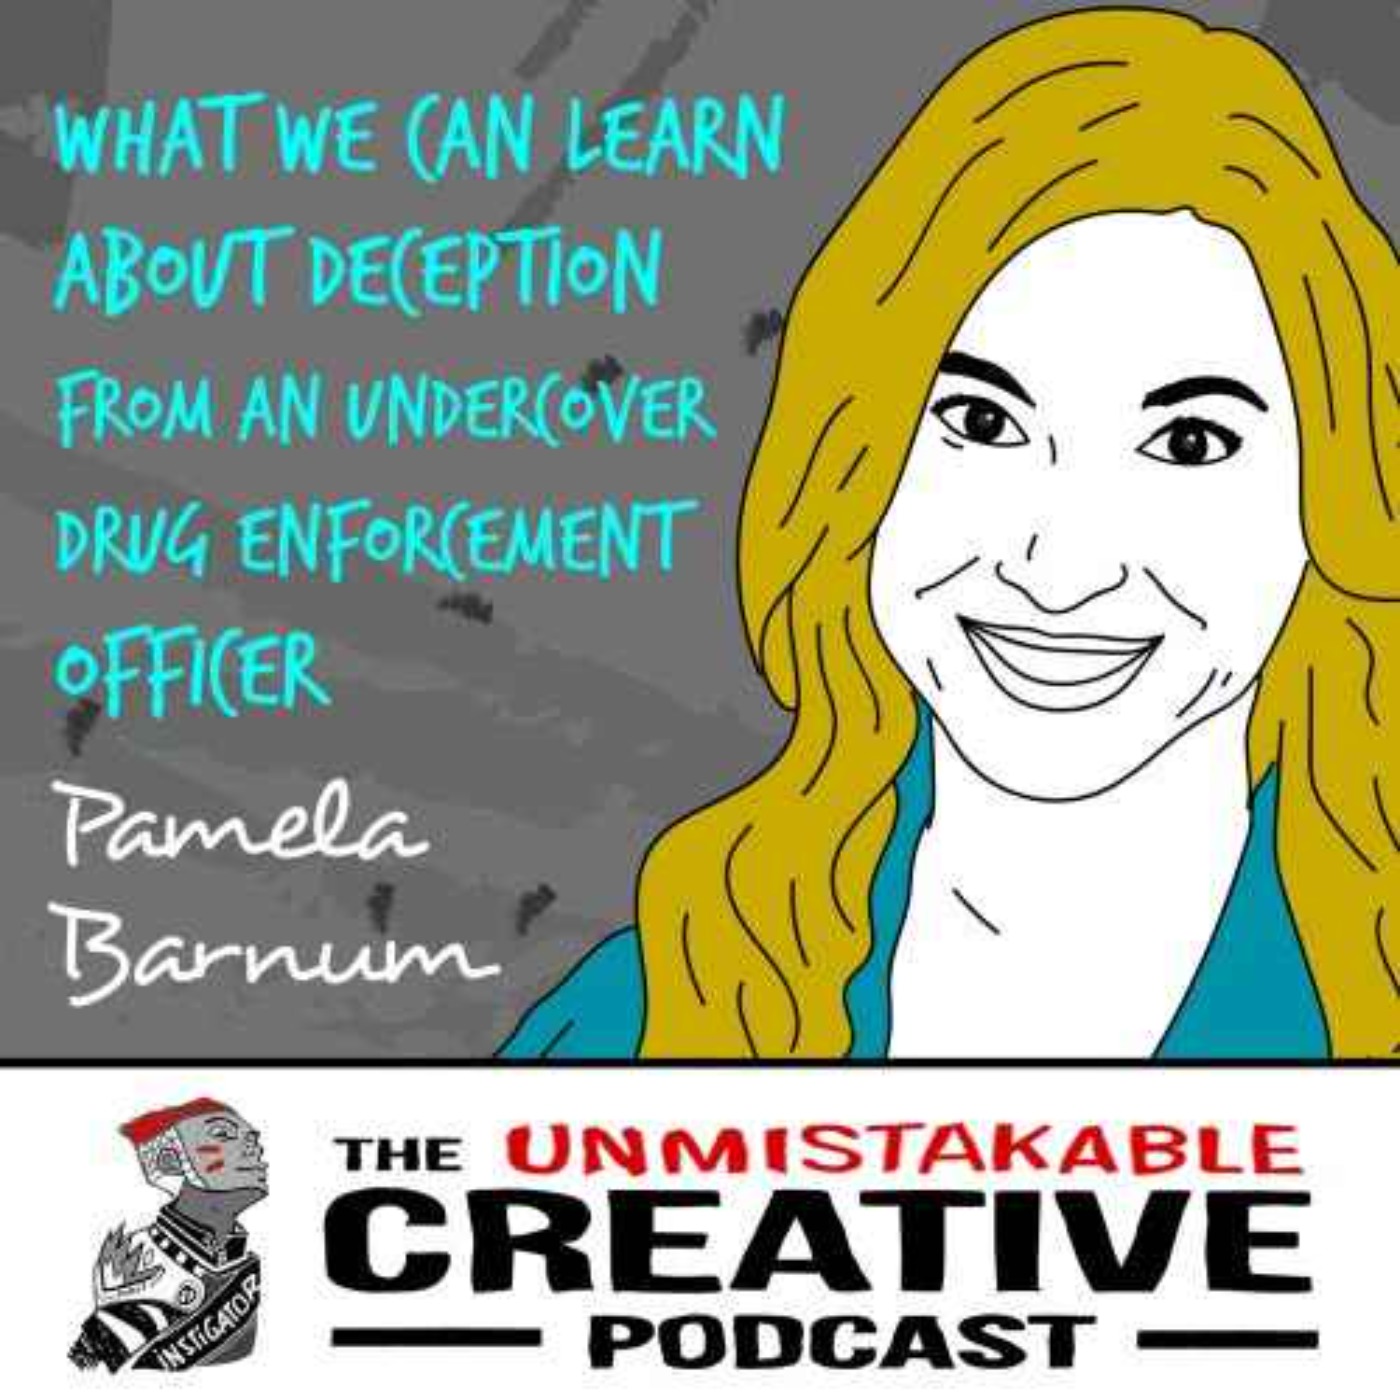 Listener Favorites: Pamela Barnum | What We Can Learn About Deception from an Undercover Drug Enforcement Officer